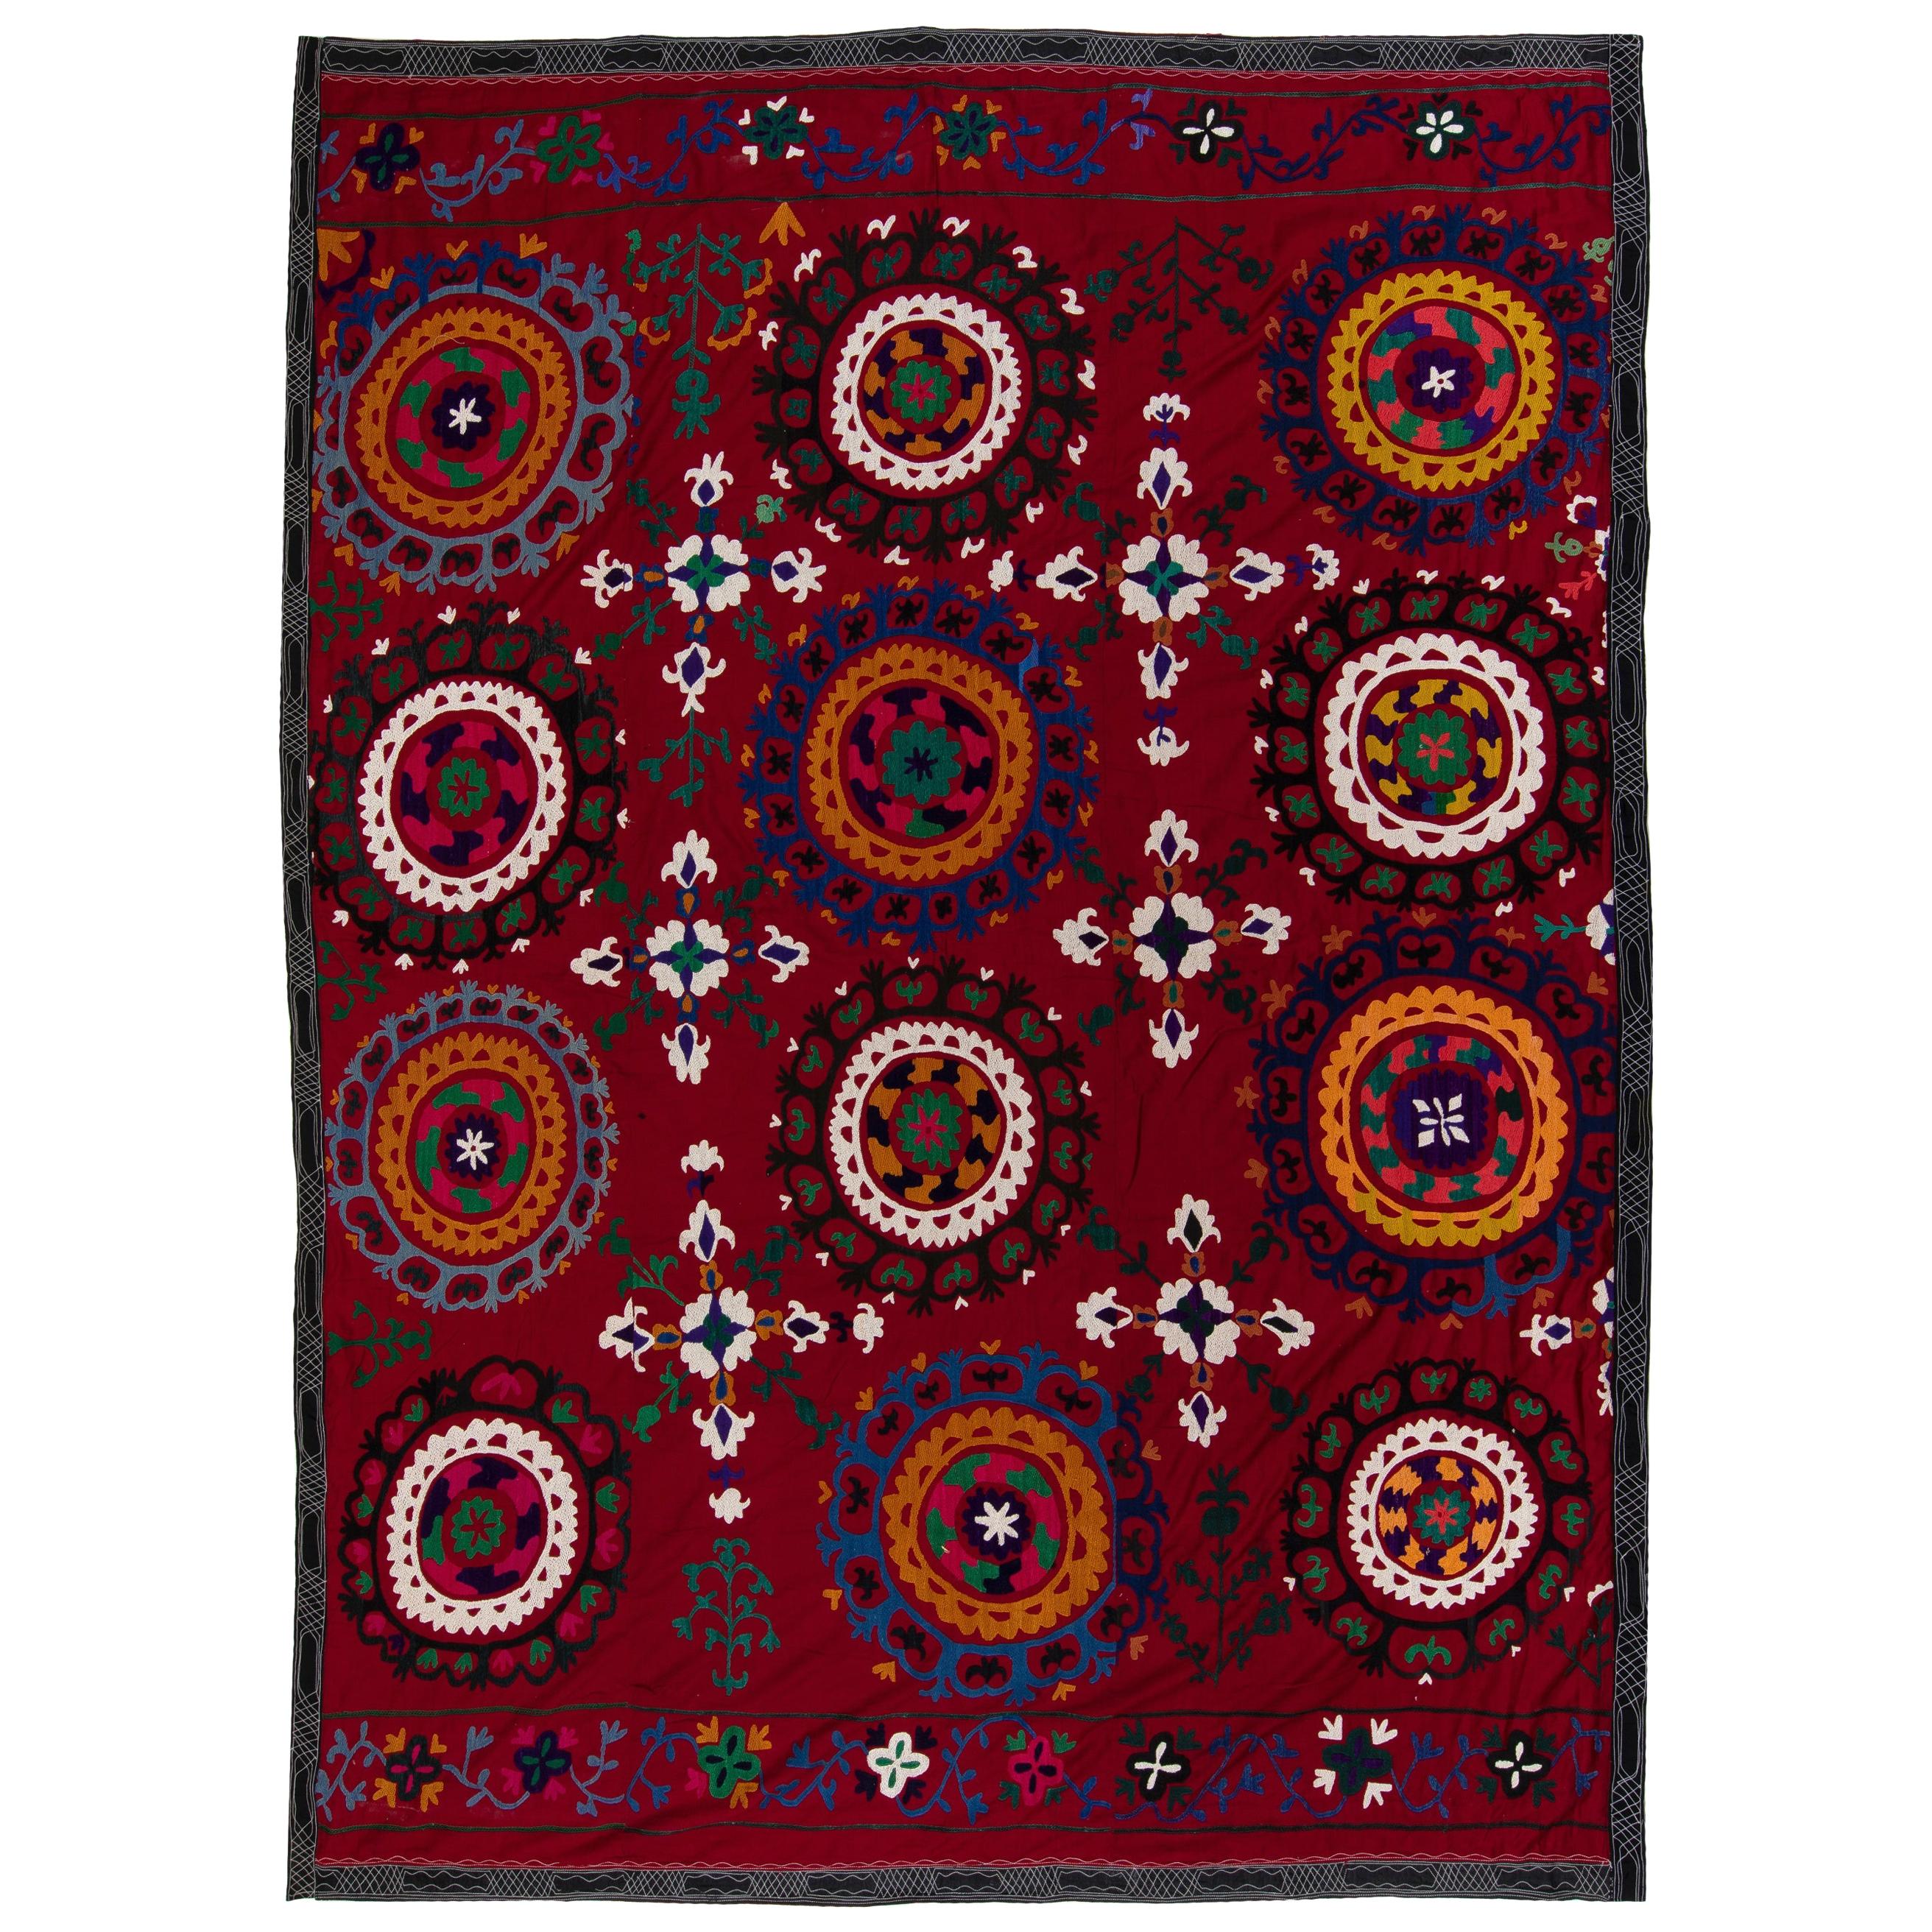 6.4x8.4 Ft Central Asian Suzani Textile, Embroidered Cotton & Silk Wall Hanging For Sale